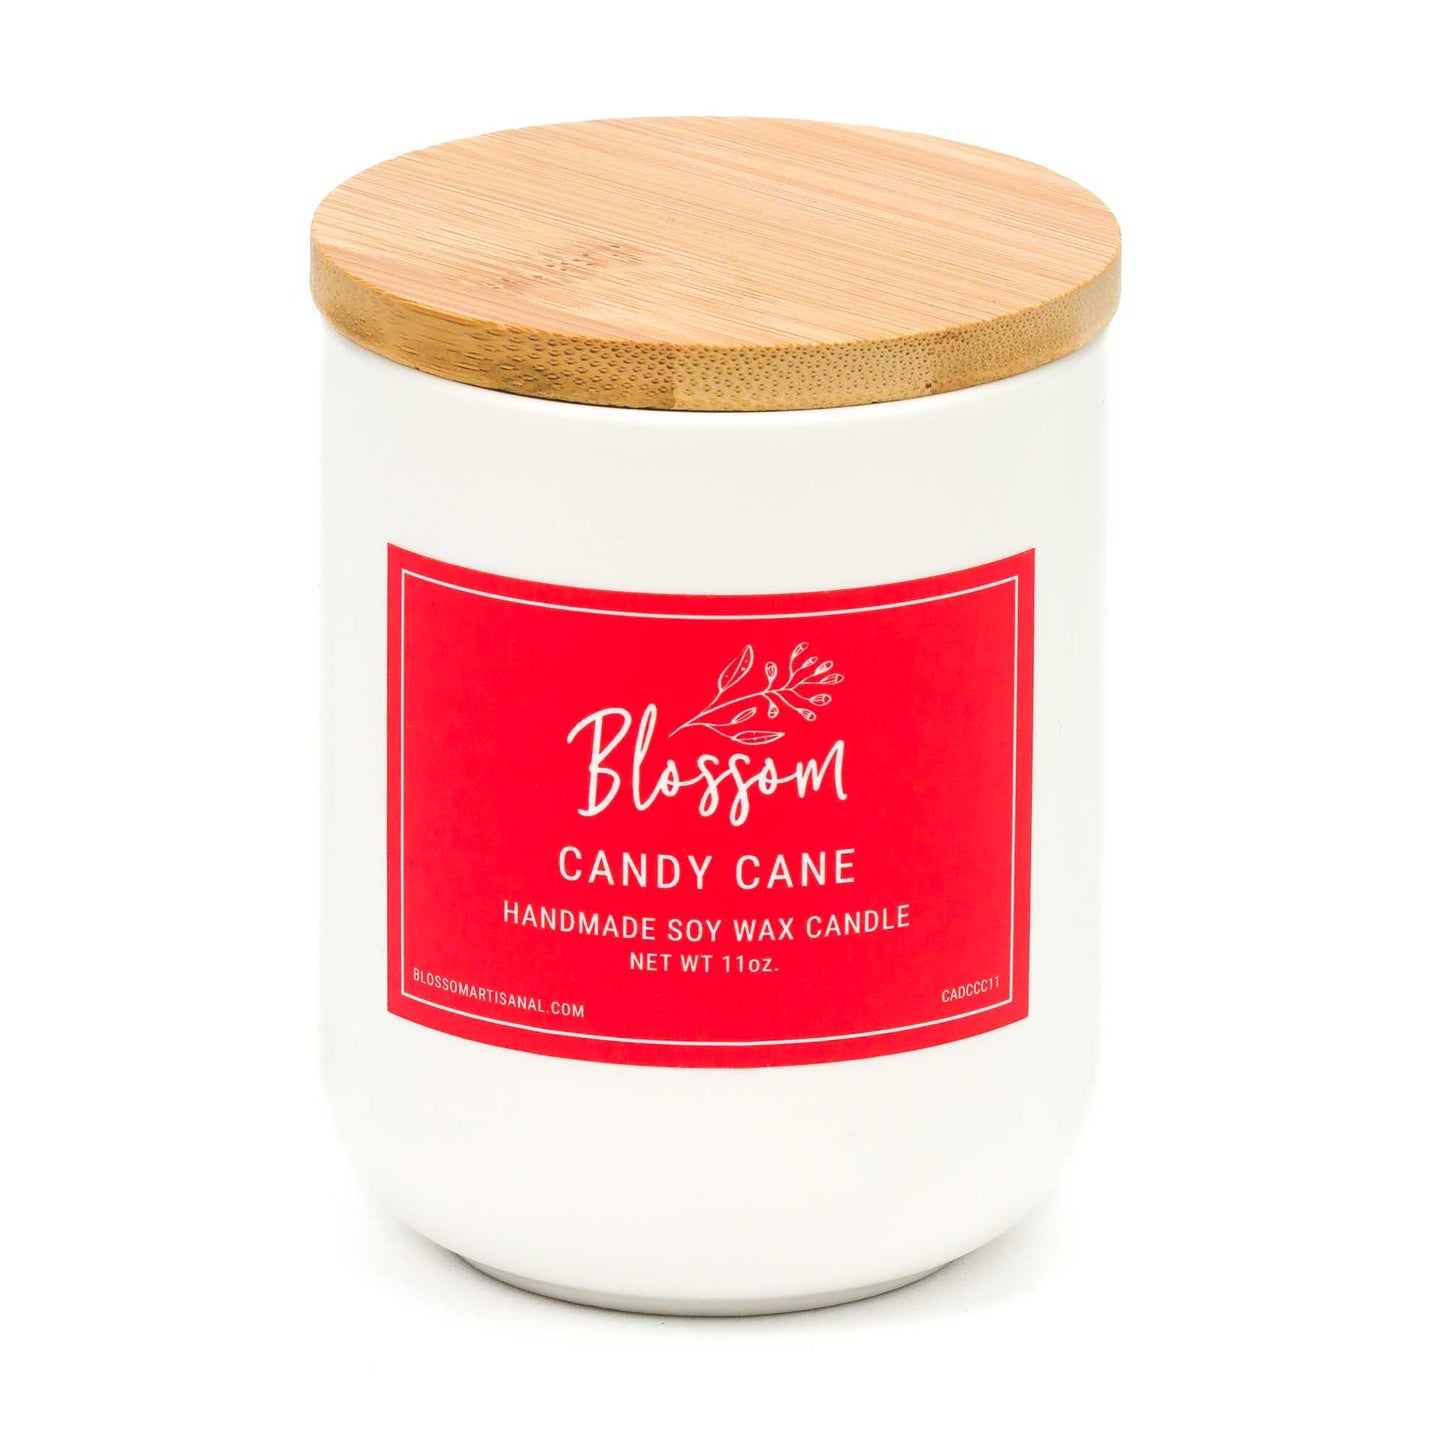 Candy Cane 11 oz. Deco Soy Wax Candle